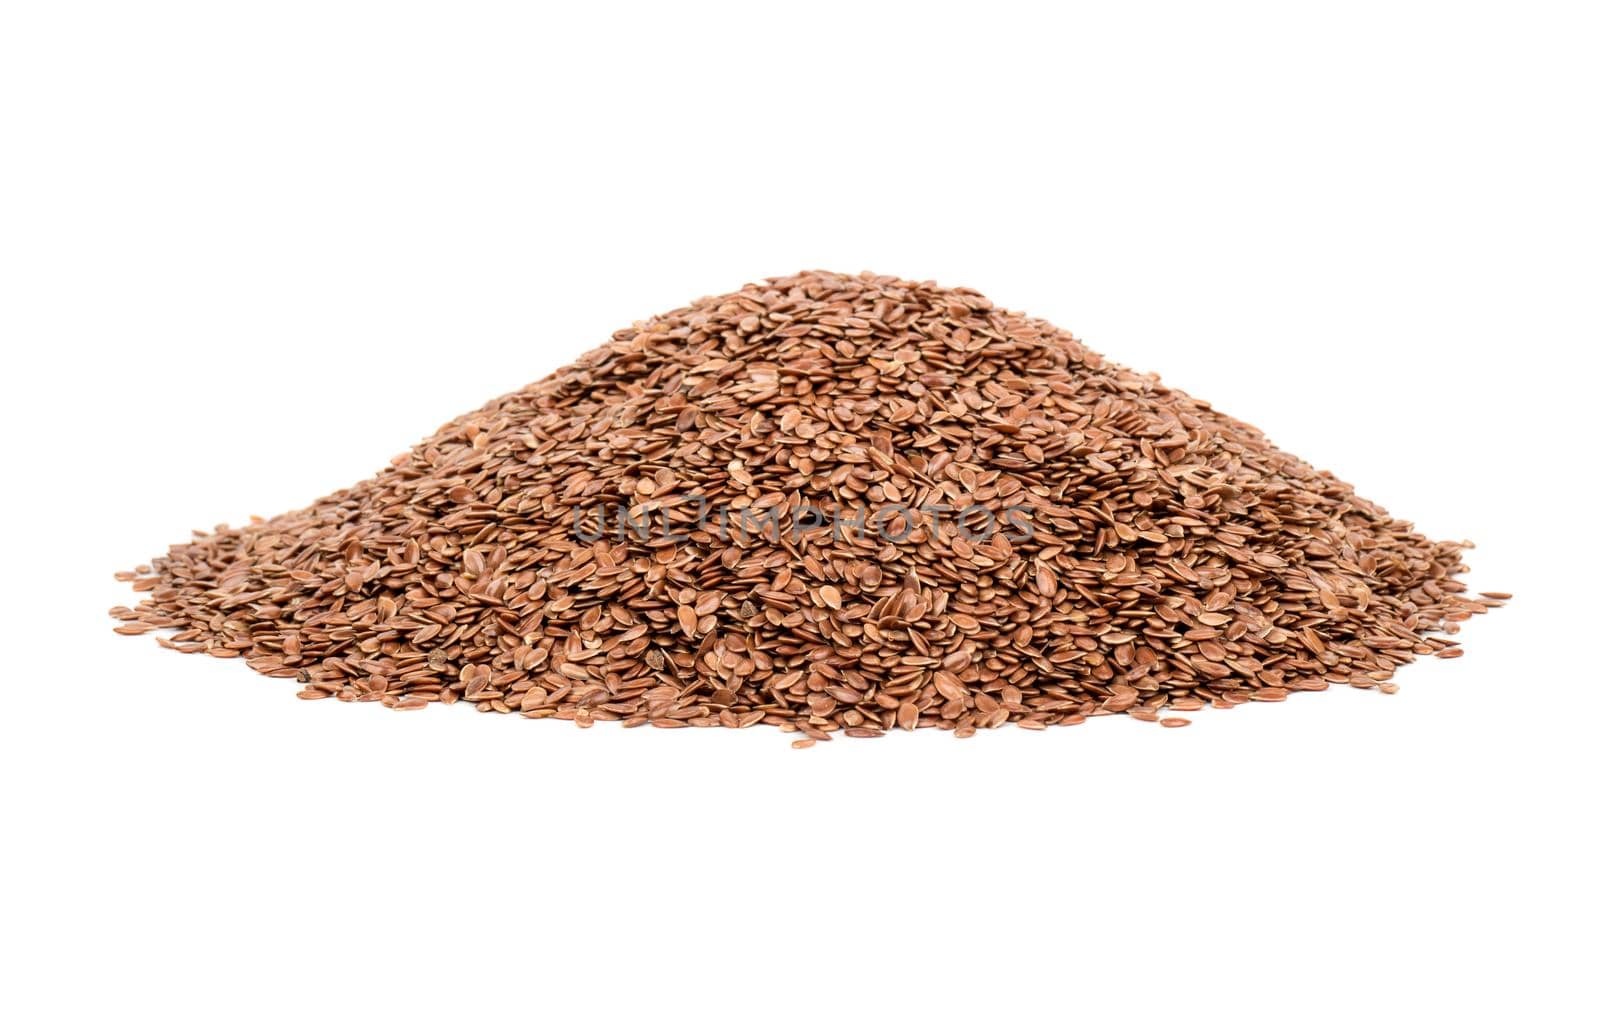 Heap of flax seeds by andregric